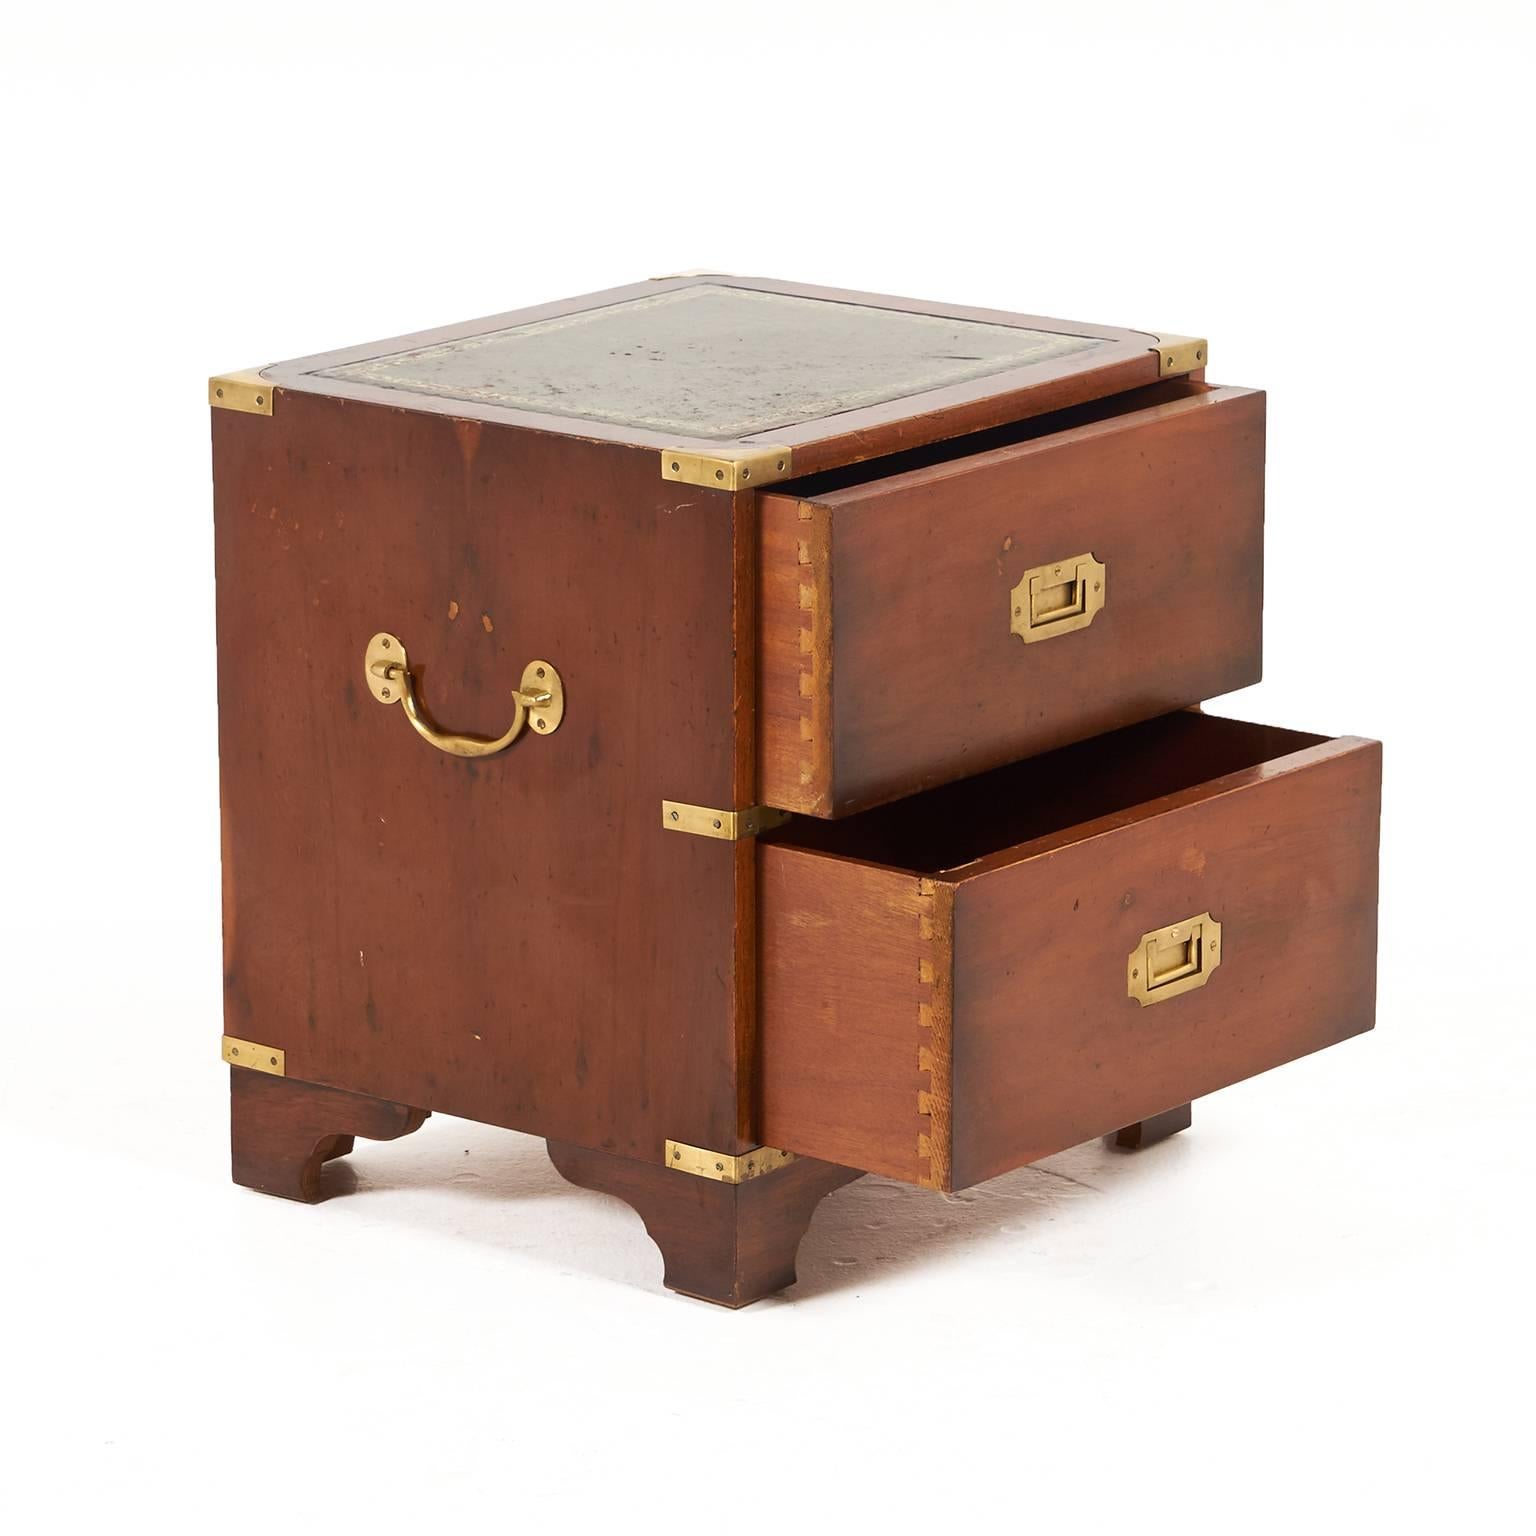 Midcentury small nightstand/chest, French campaign style – with two drawers. Decorative and distinctive, with a leather inset top and brass accents. Small enough to be useful in many rooms throughout the home.




